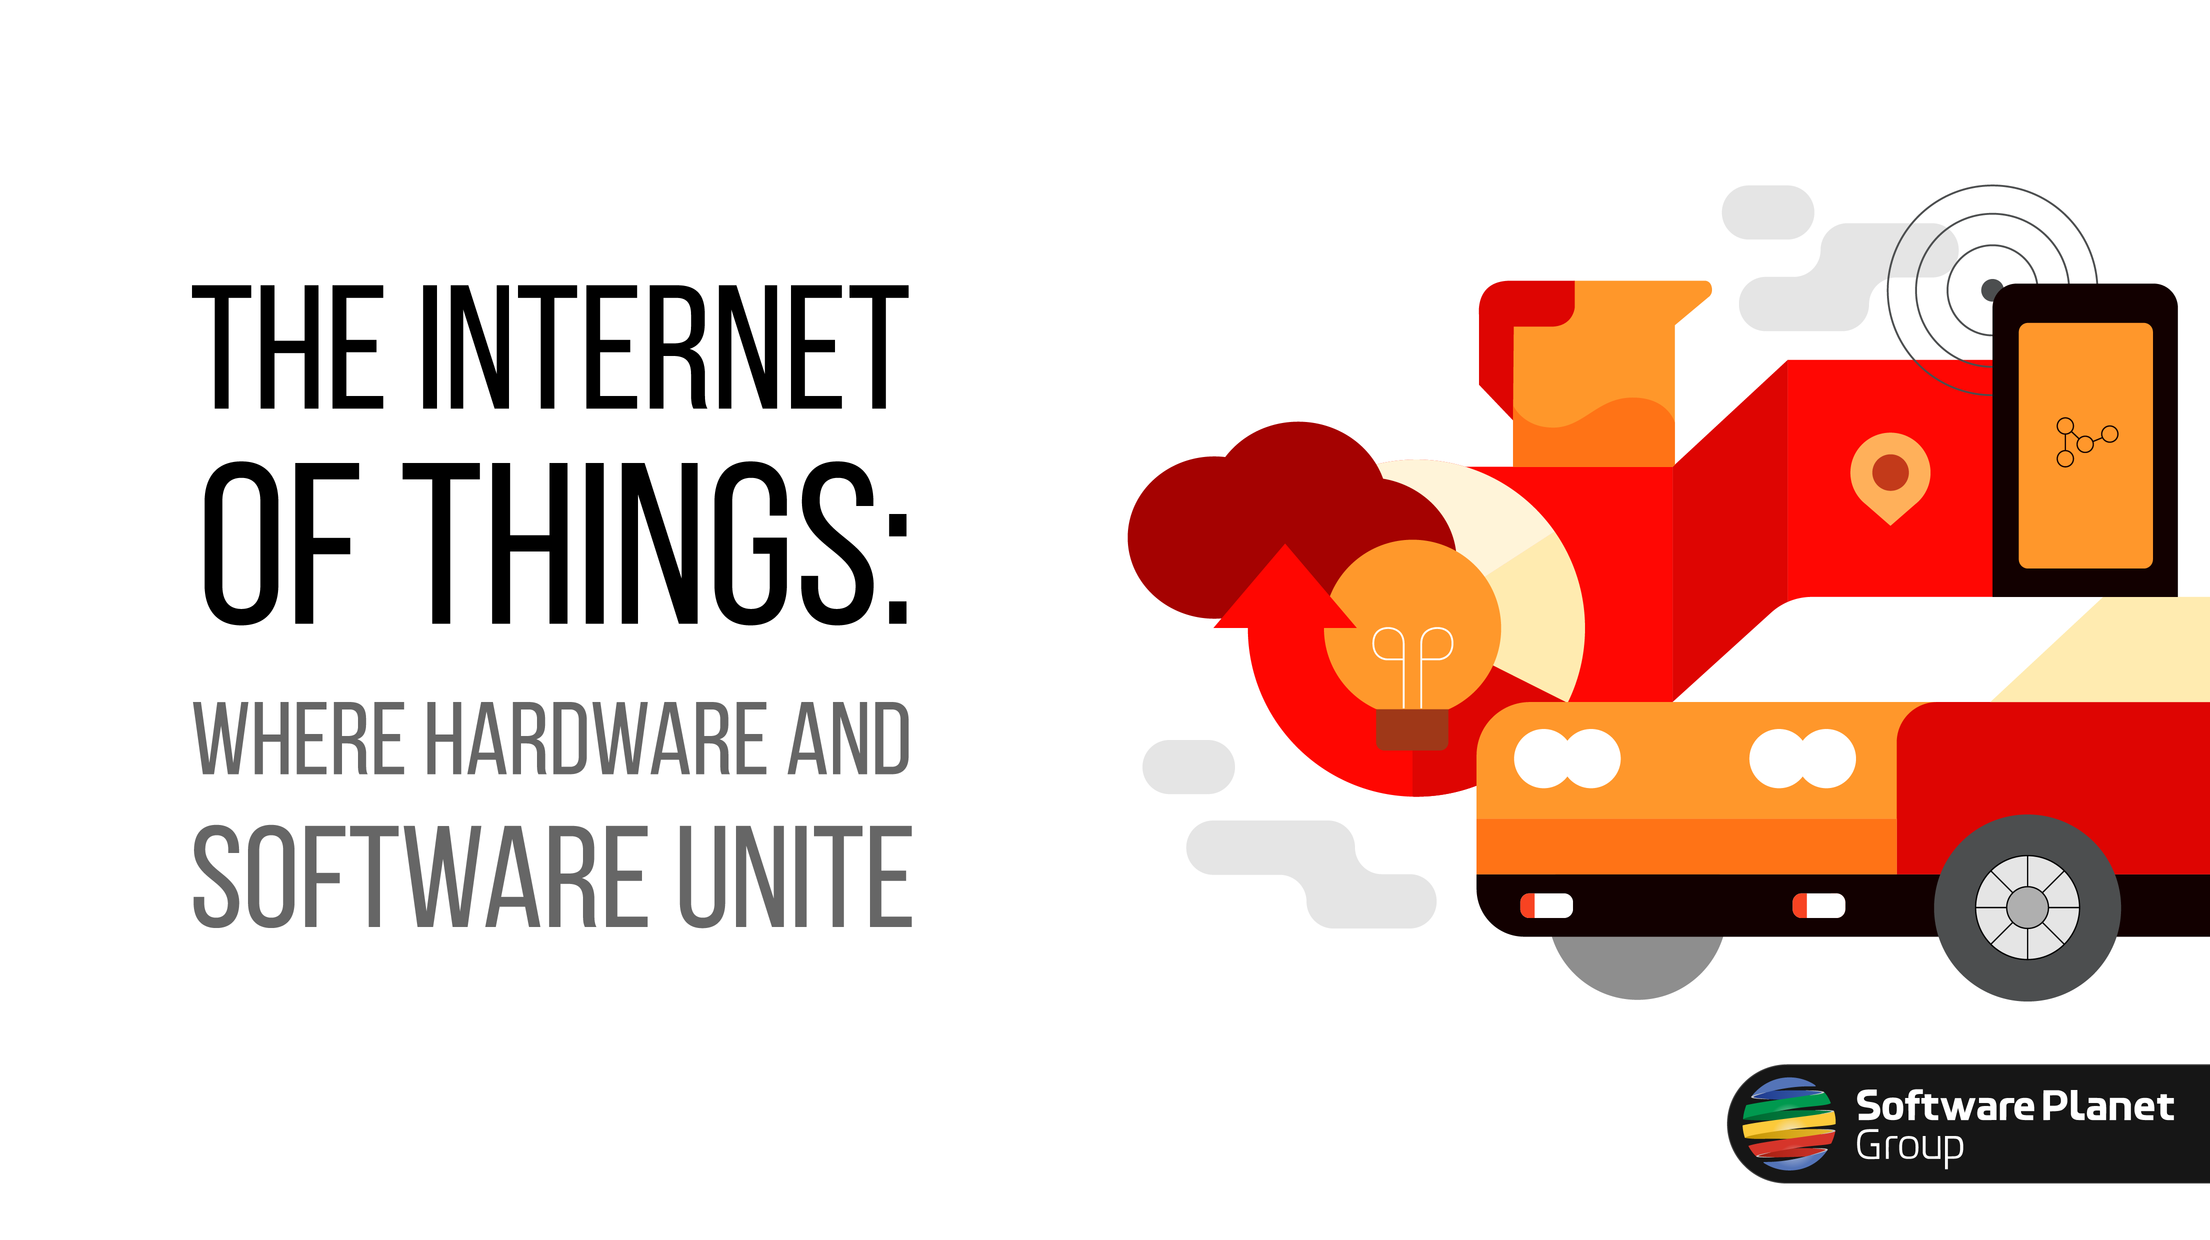 A number of Internet of Things solutions